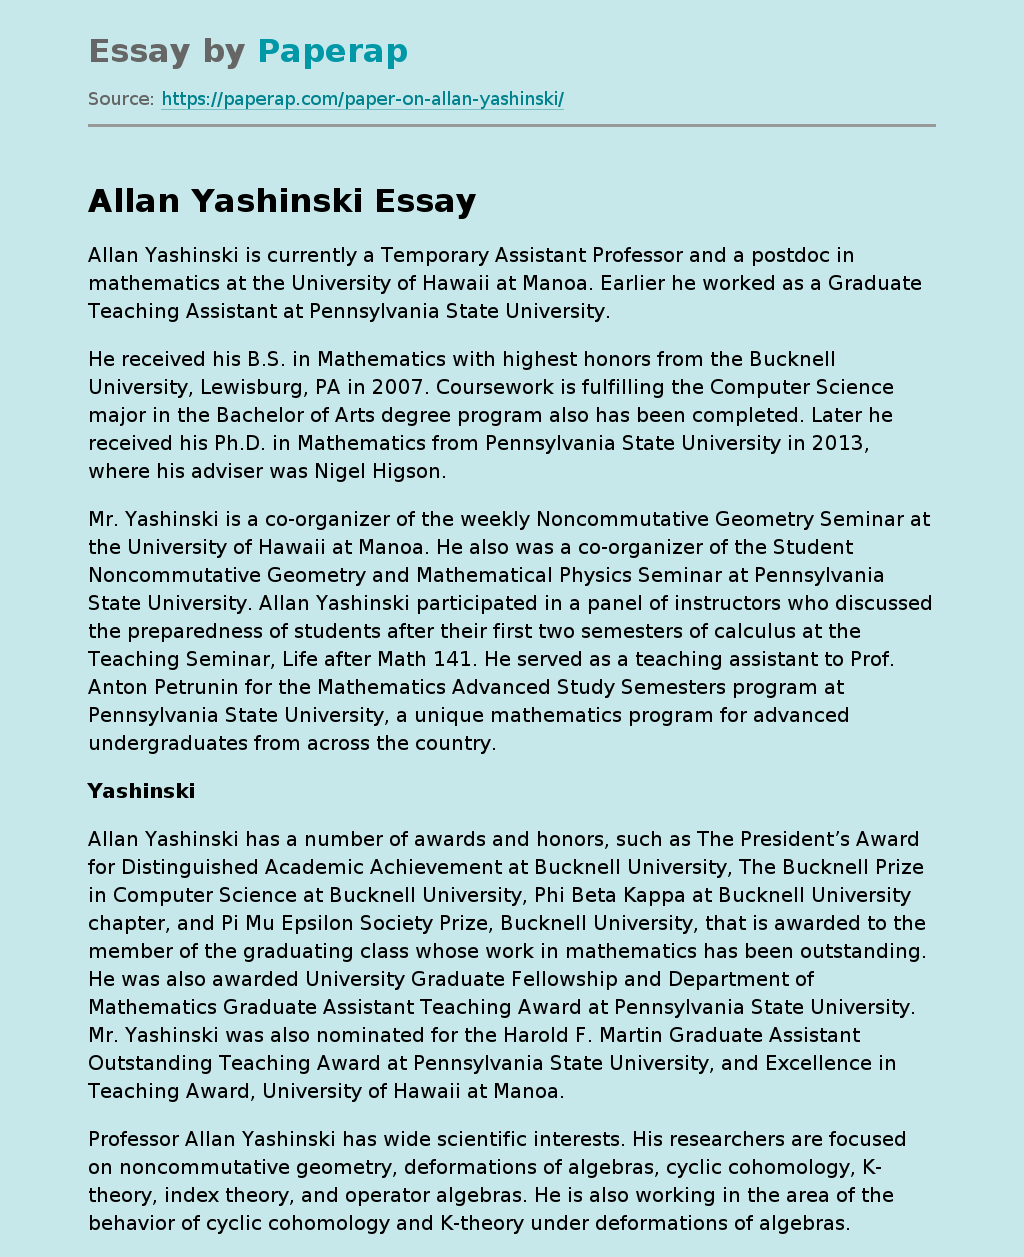 Allan Yashinski is currently a Temporary Assistant Professor